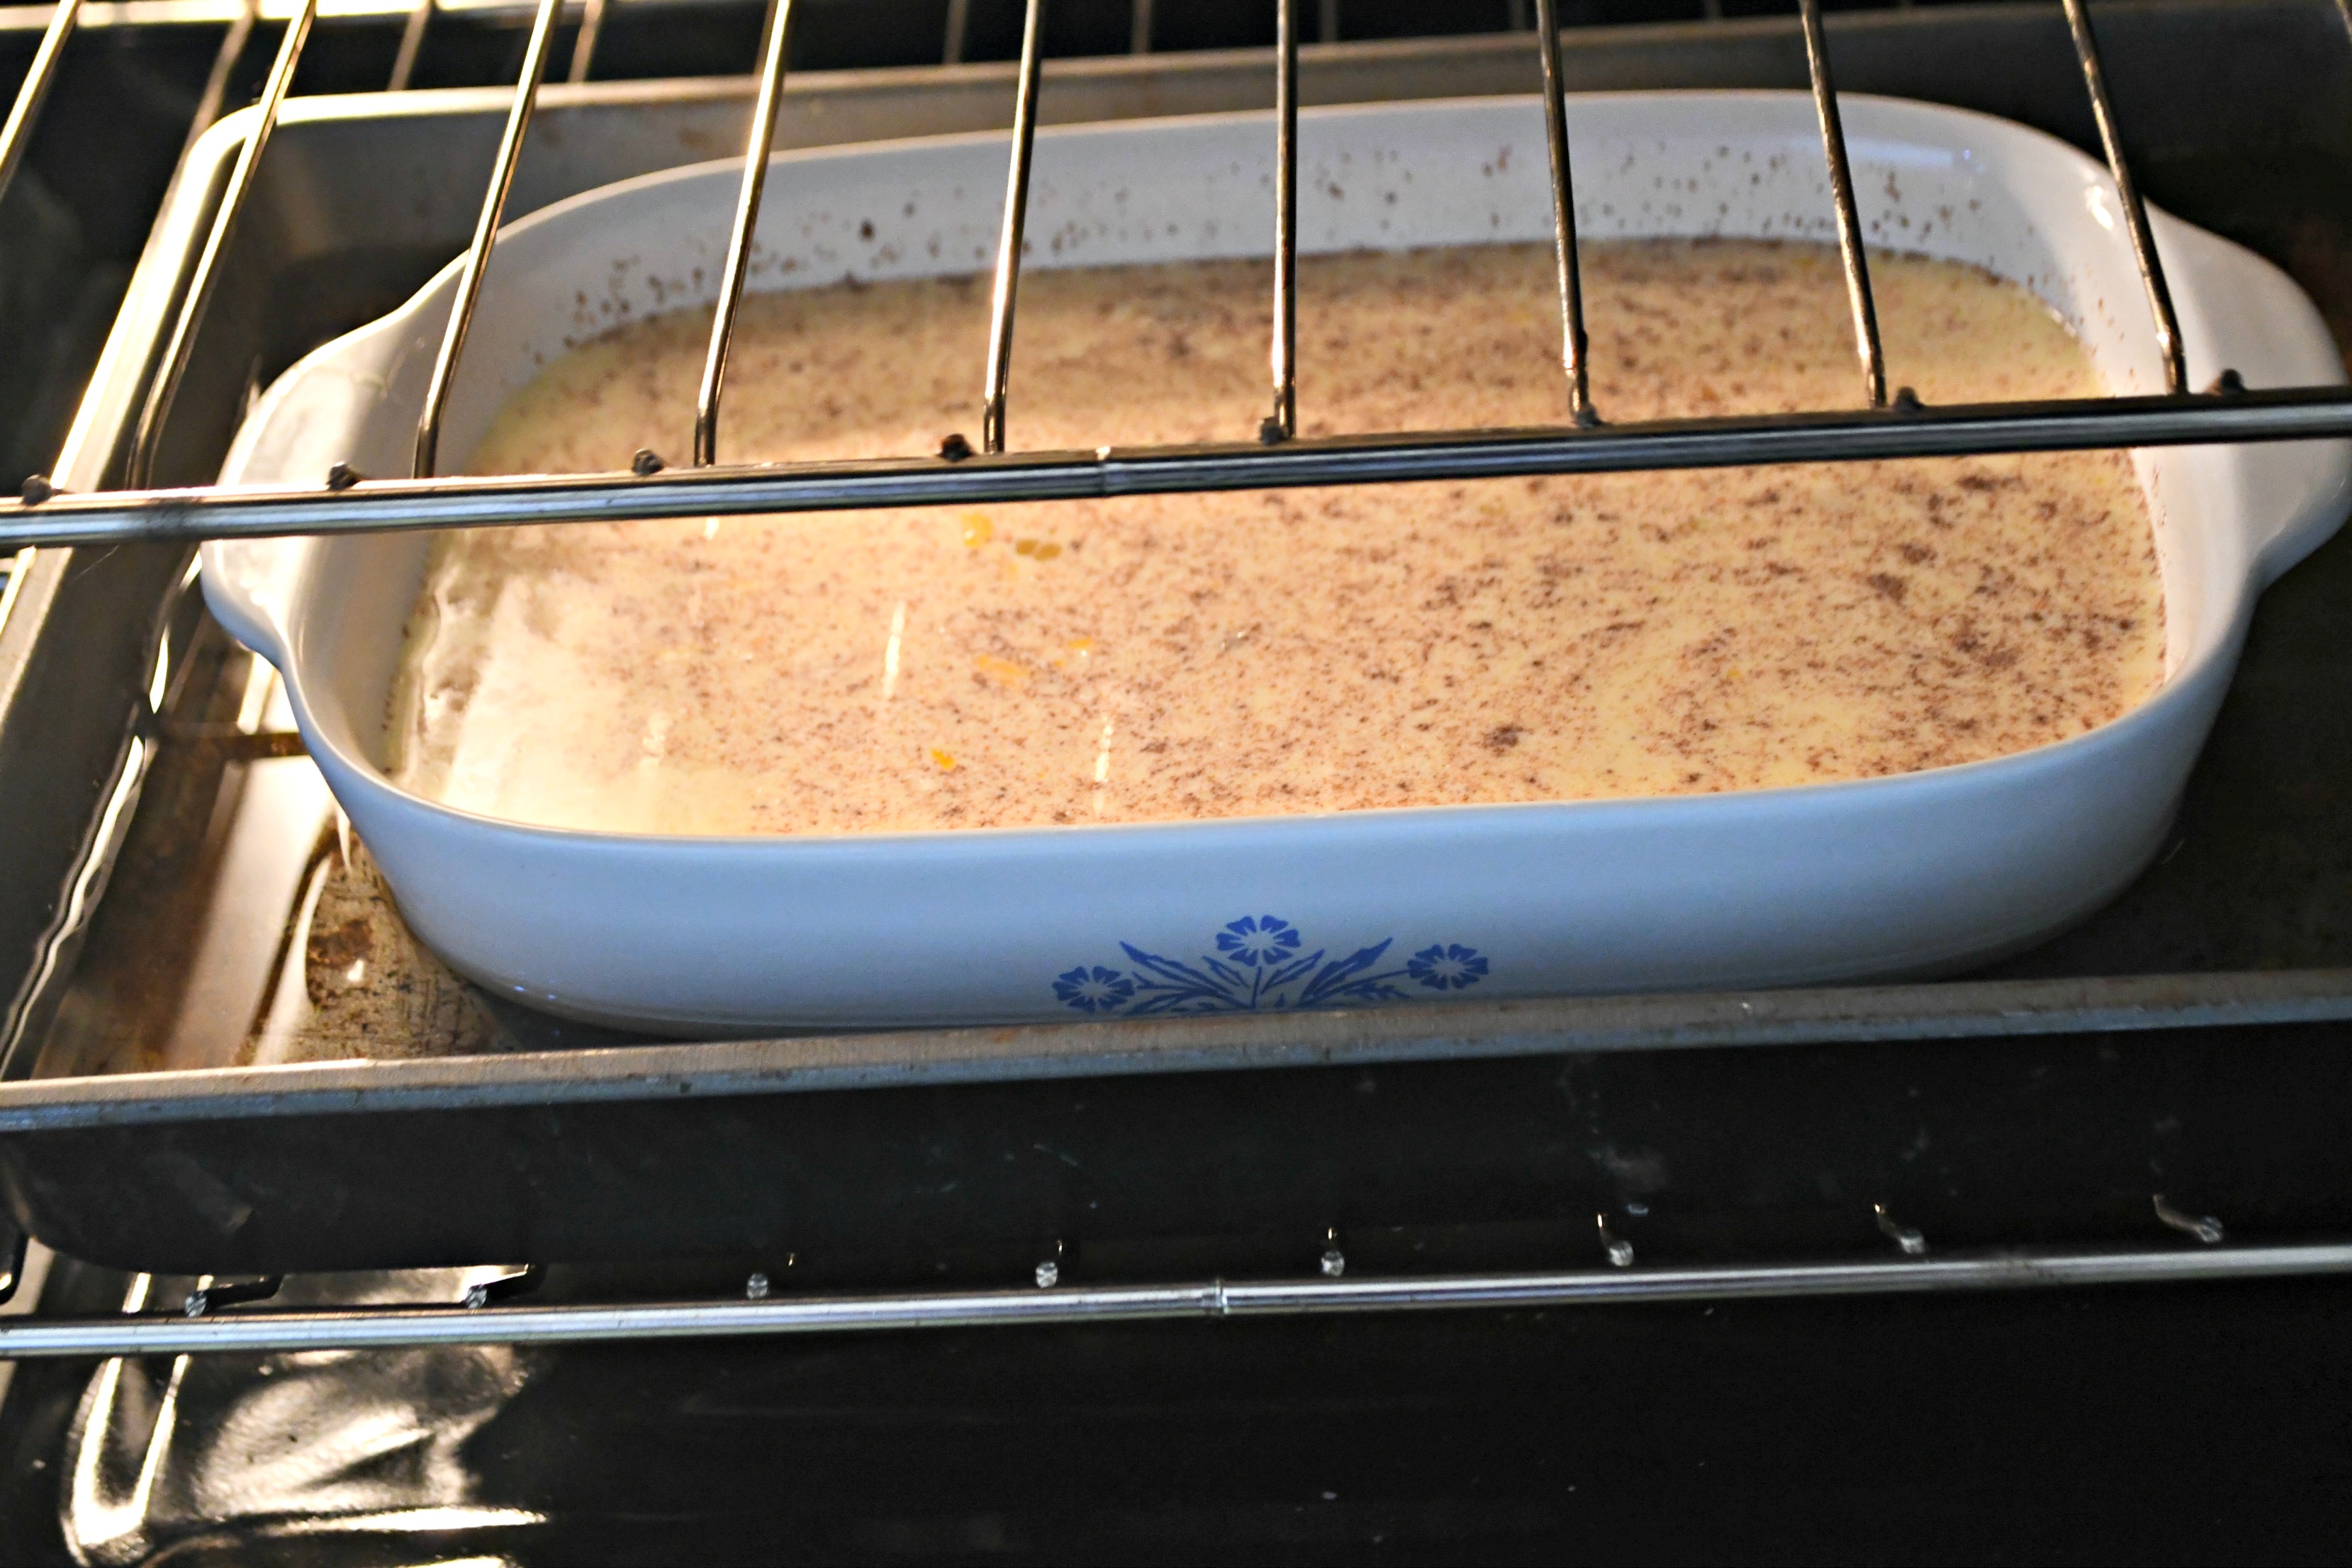 Classic Grape-Nuts Pudding in the oven in the pan of water